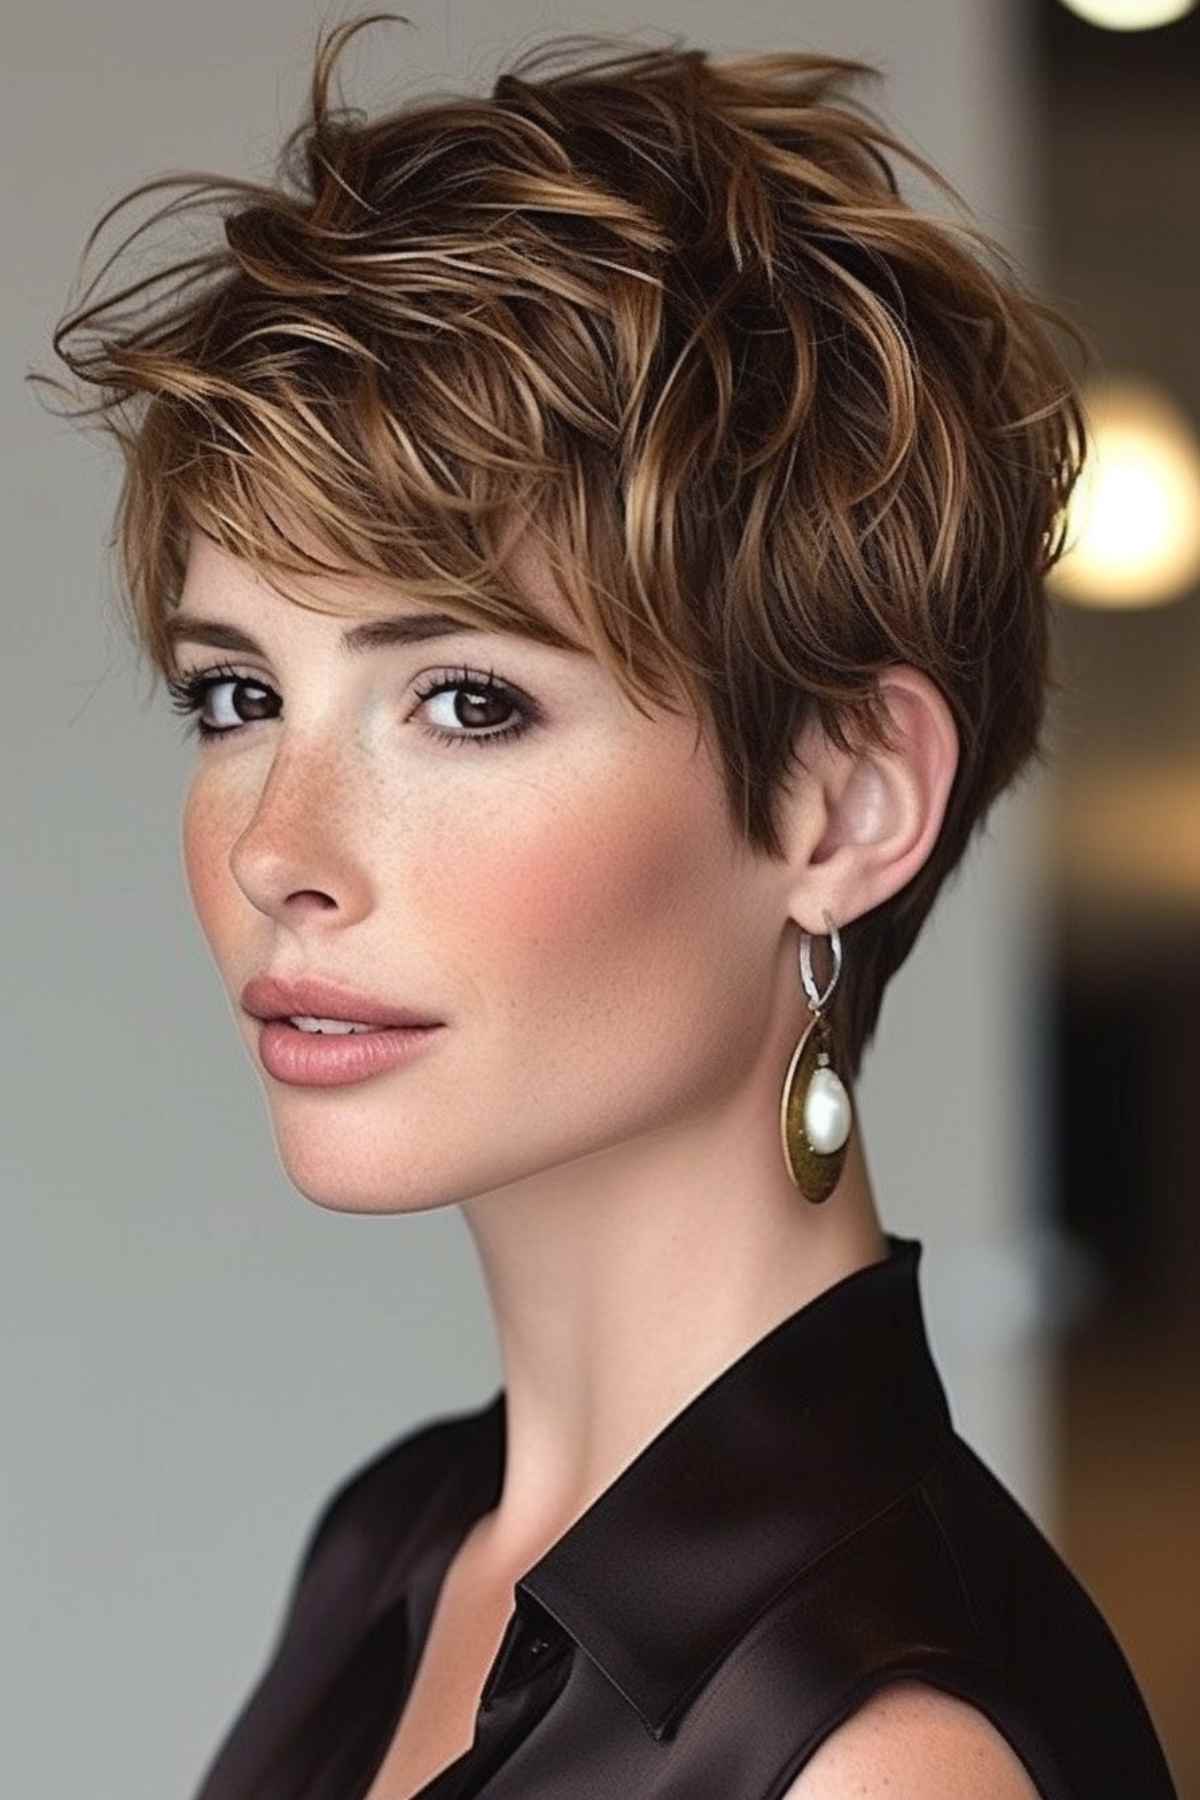 Short Textured Pixie with Fringe and Highlights